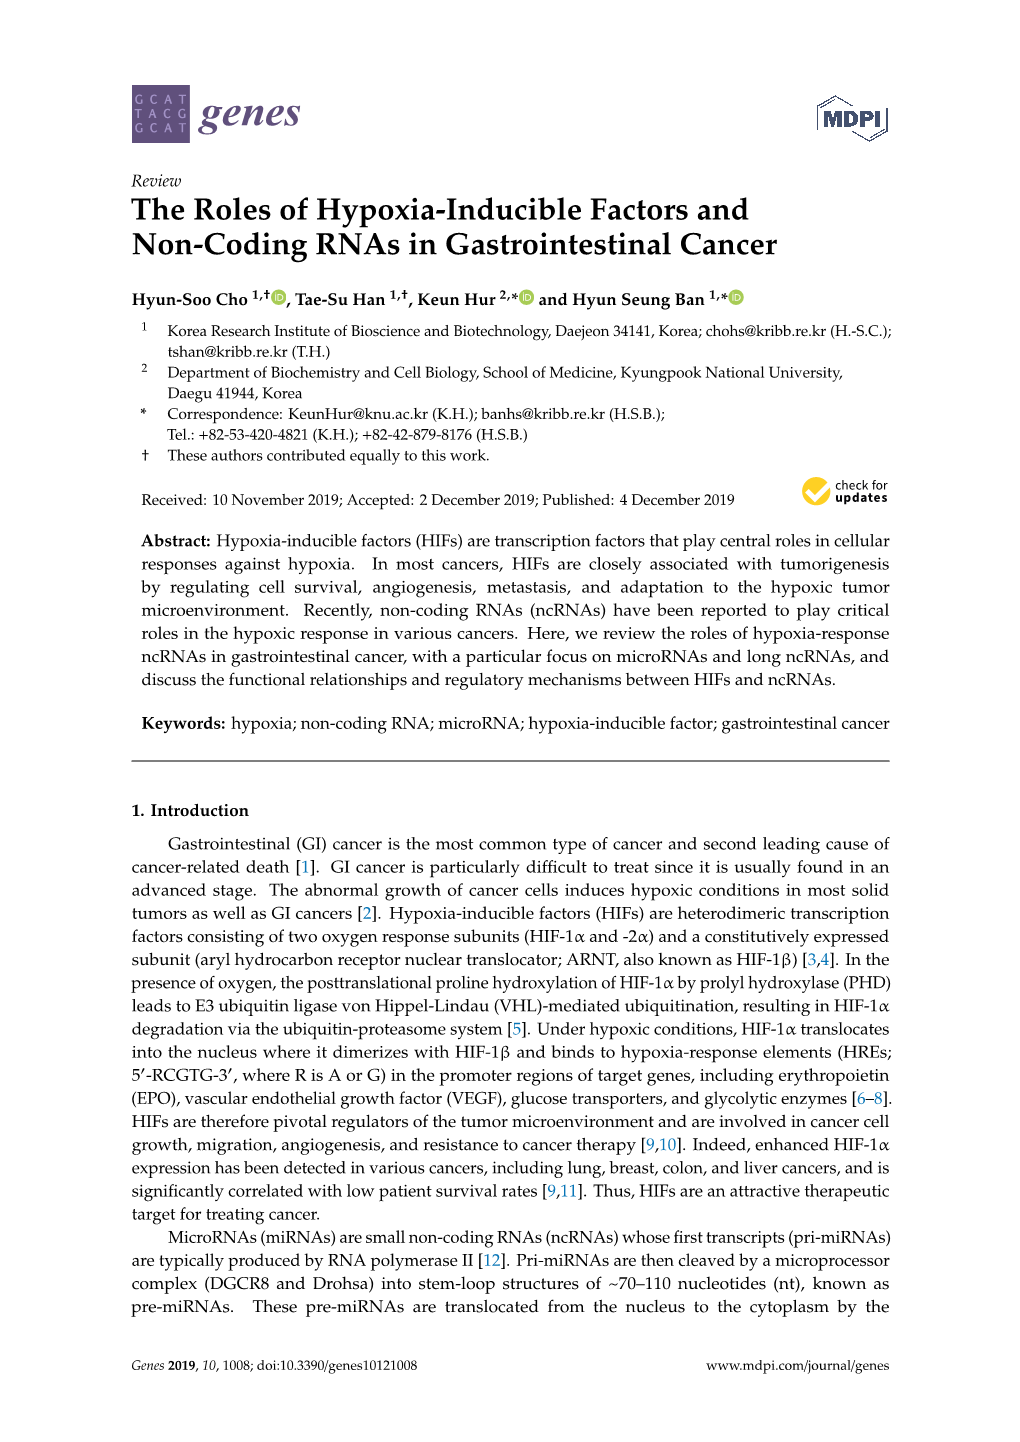 The Roles of Hypoxia-Inducible Factors and Non-Coding Rnas in Gastrointestinal Cancer